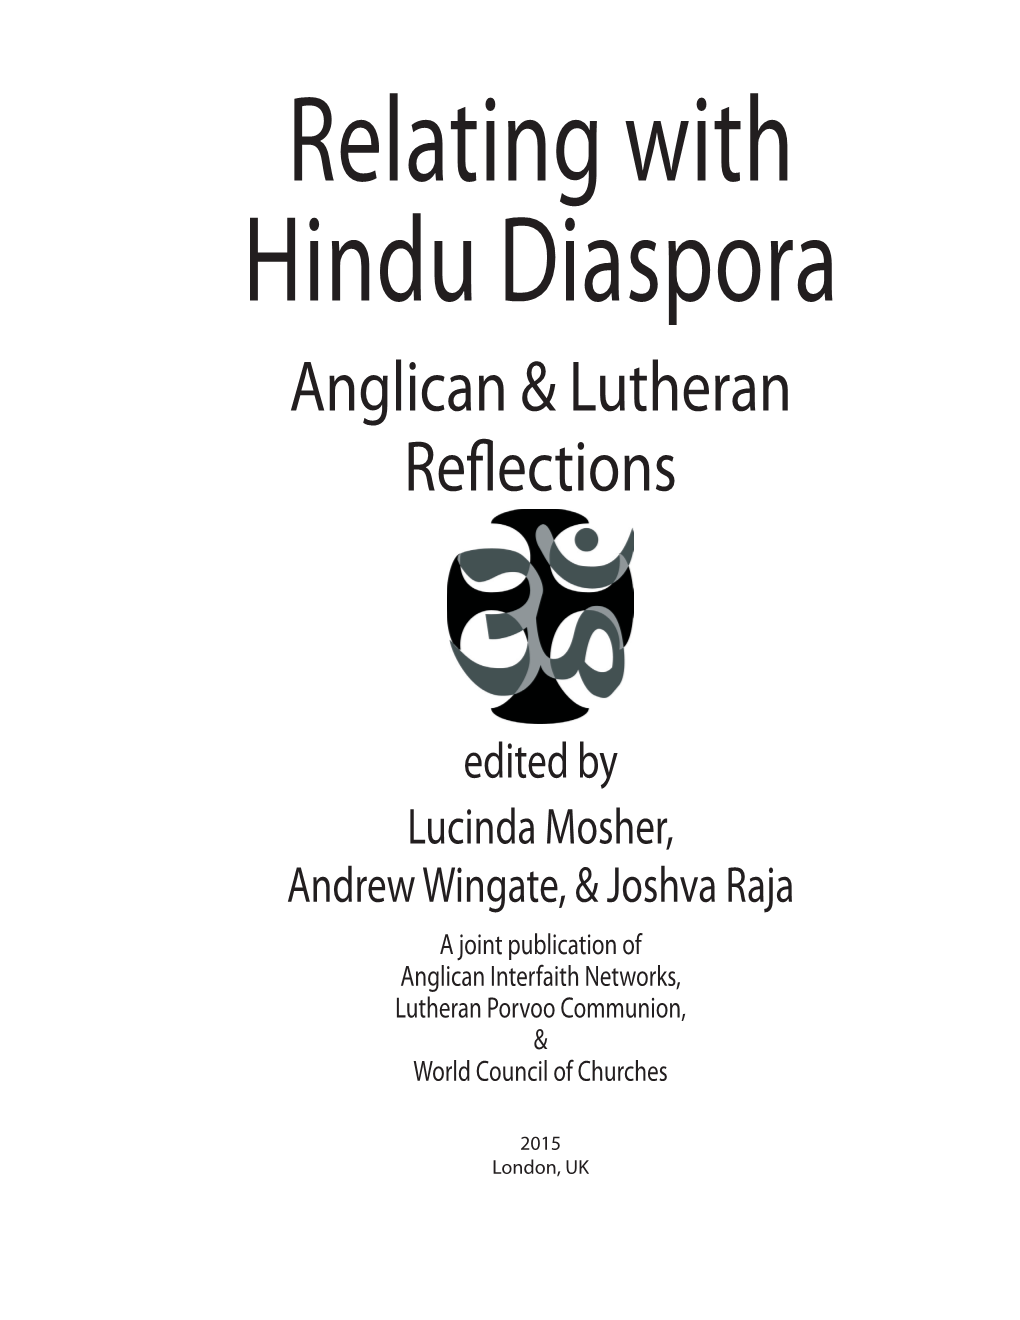 Anglican & Lutheran Reflections